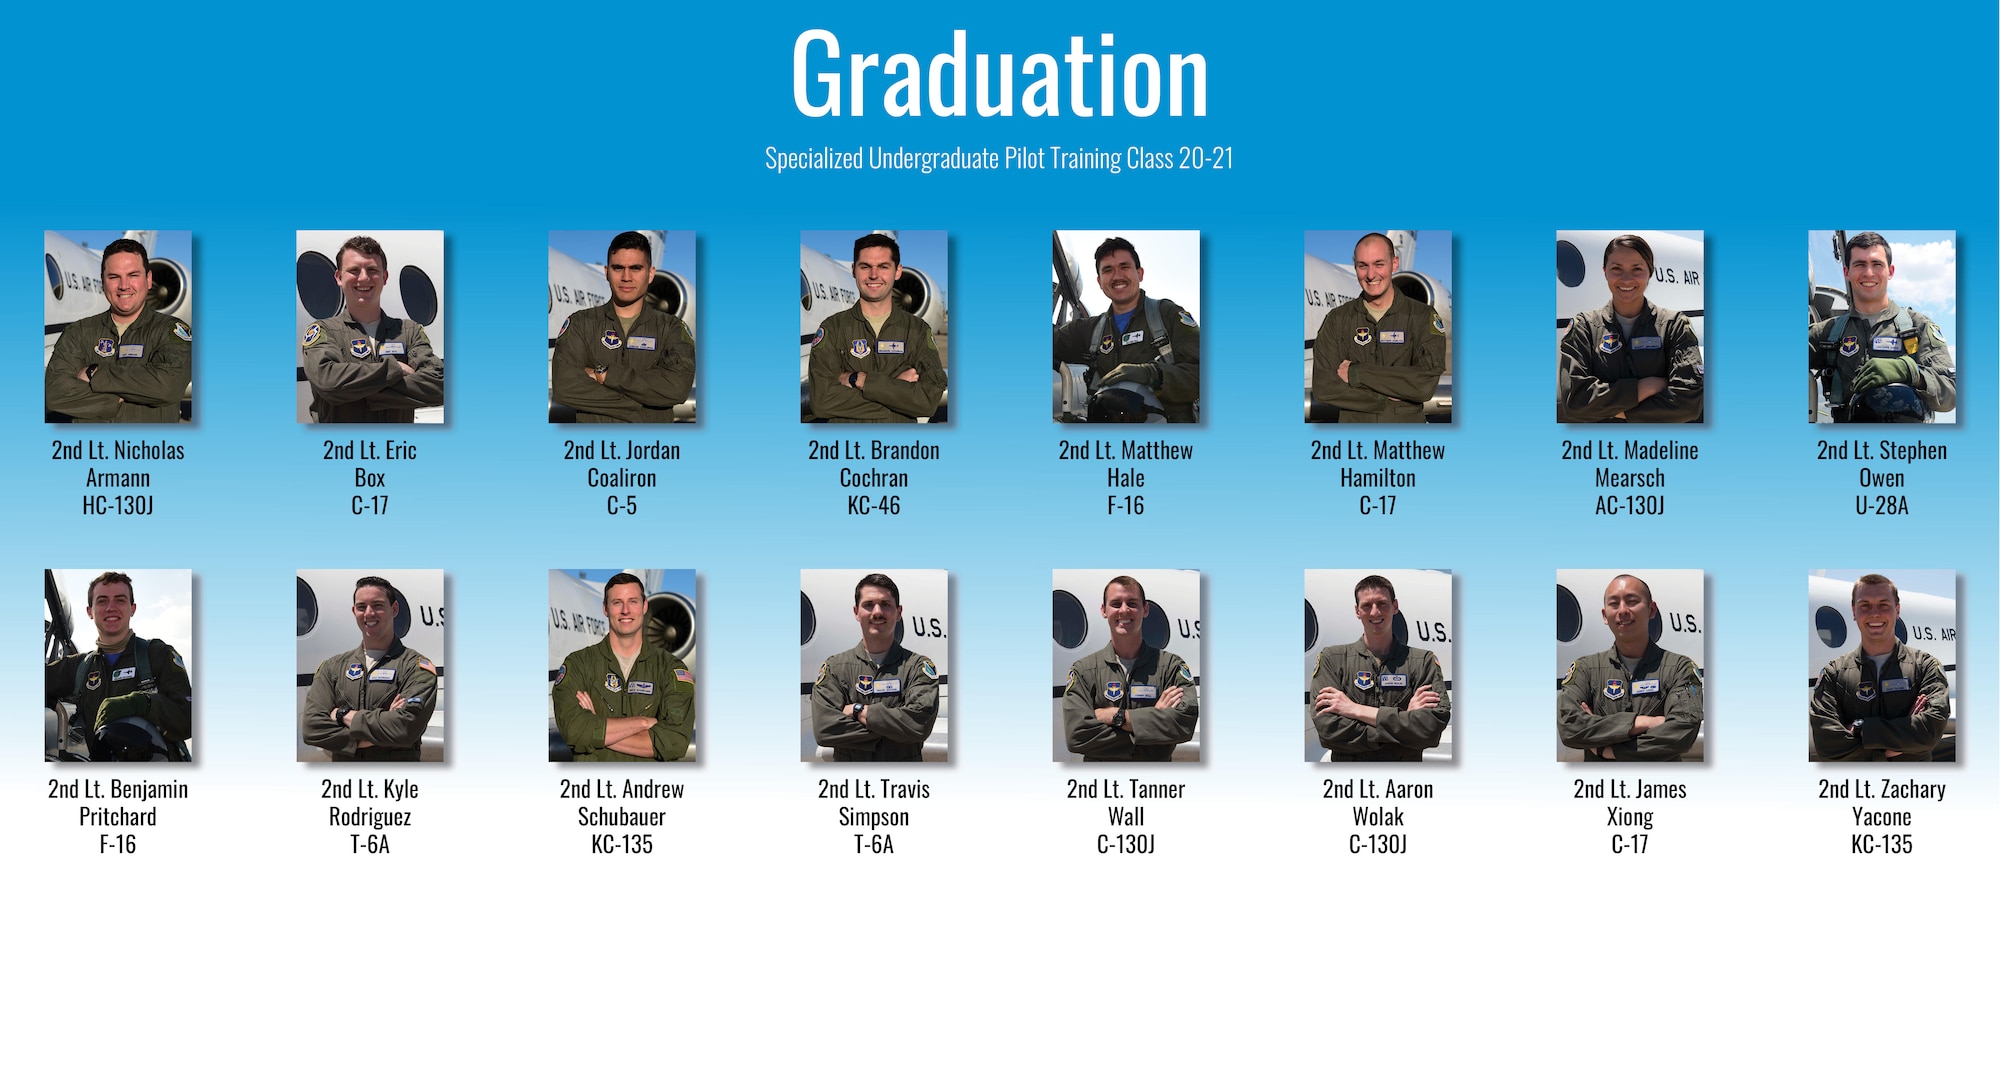 Specialized Undergraduate Pilot Training Class 20-20 and 20-21 are set to graduate after 52 weeks of training at Laughlin Air Force Base, Texas, Aug. 8, 2020. Laughlin is the home of the 47th Flying Training Wing, whose mission is to build combat-ready Airmen, leaders and pilots. (U.S. Air Force graphic by Senior Airman Marco A. Gomez)